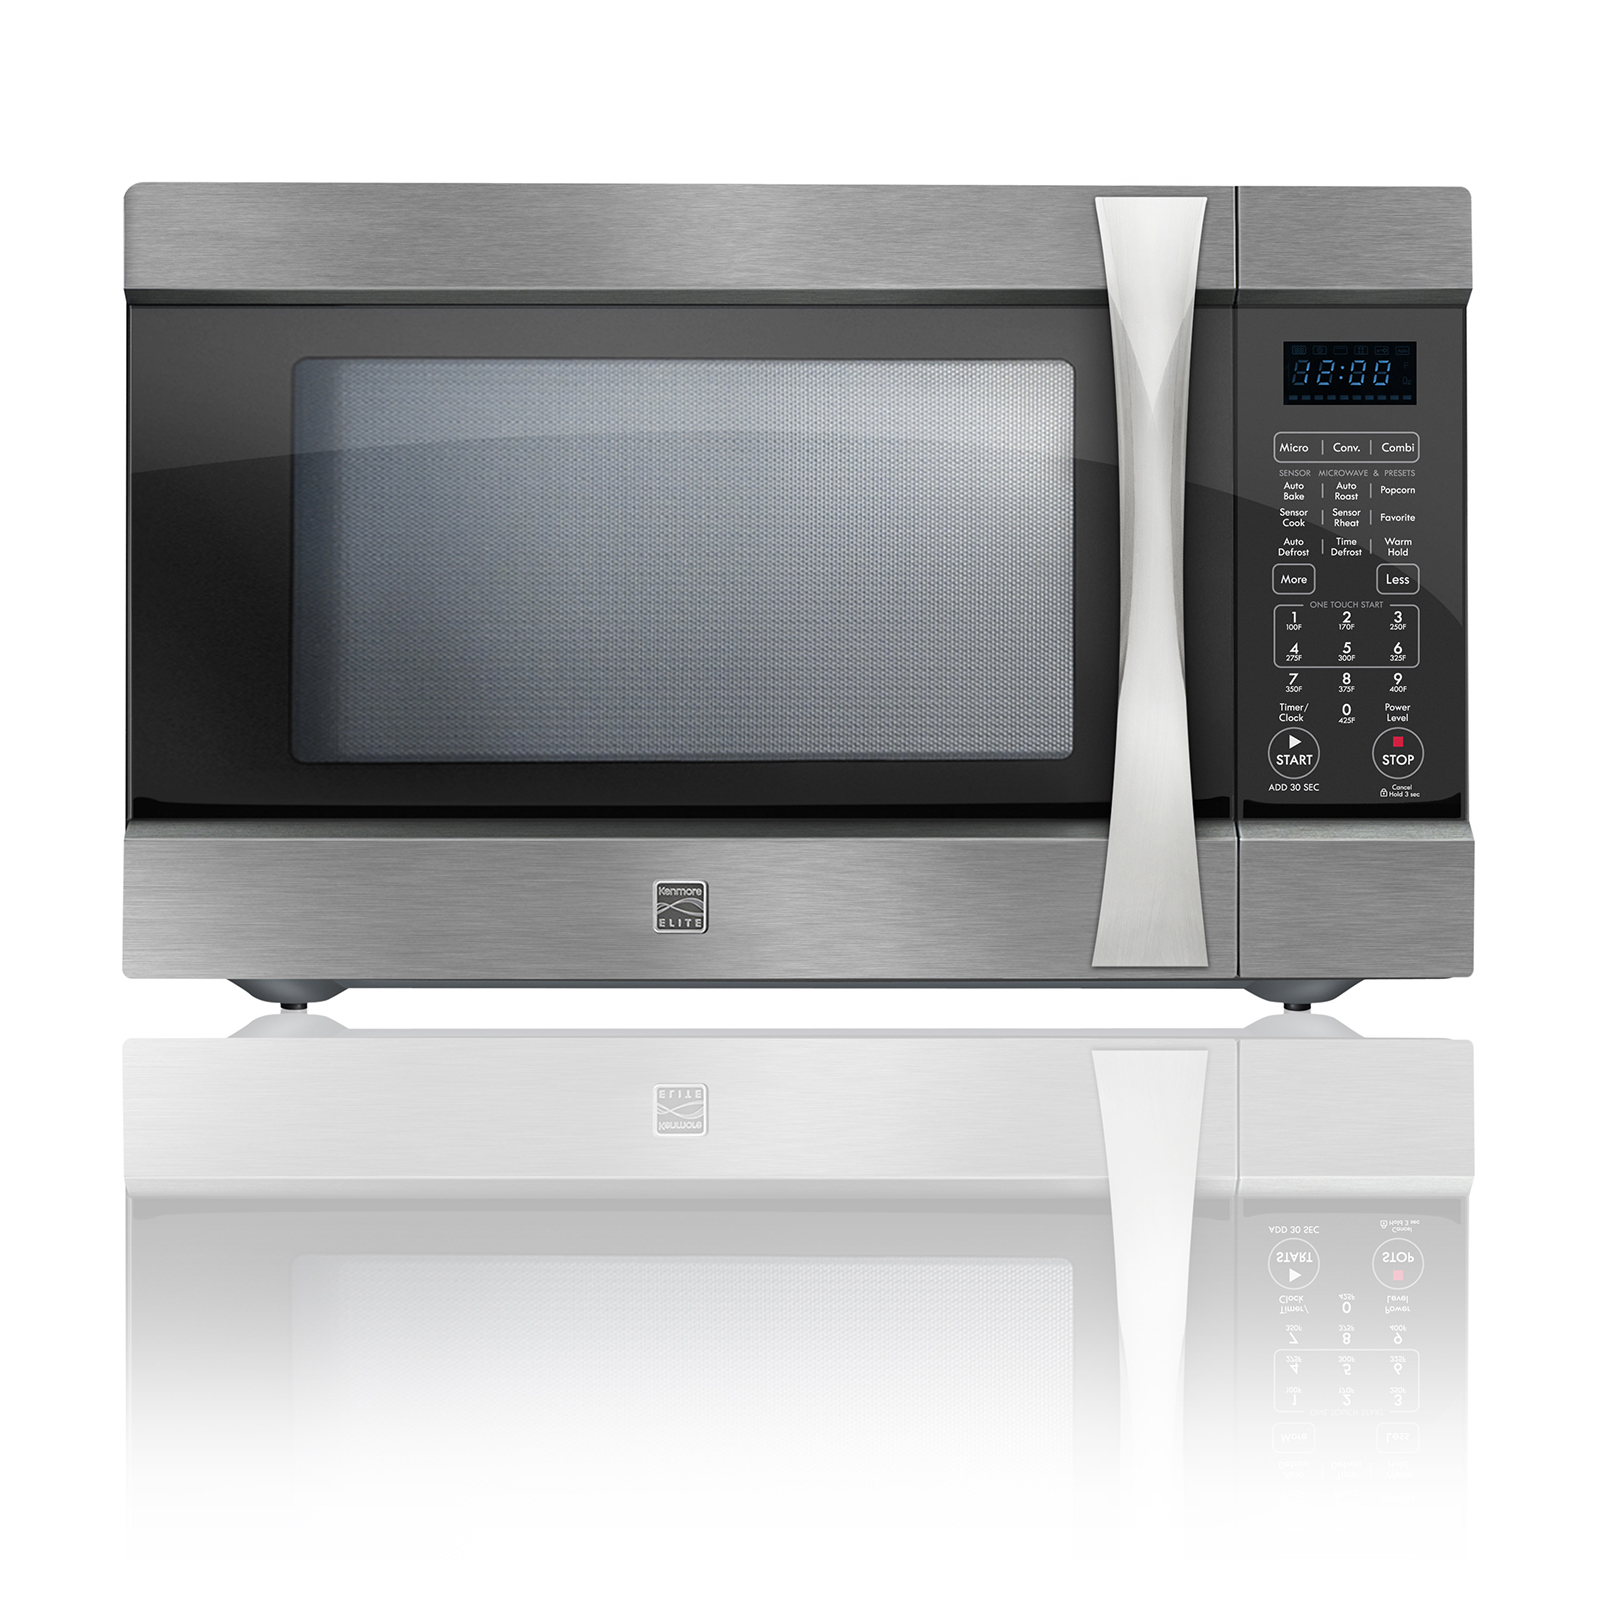 0839724009088 - KENMORE ELITE 1.5 CU. FT. COUNTERTOP MICROWAVE W/ CONVECTION STAINLESS STEEL 74153